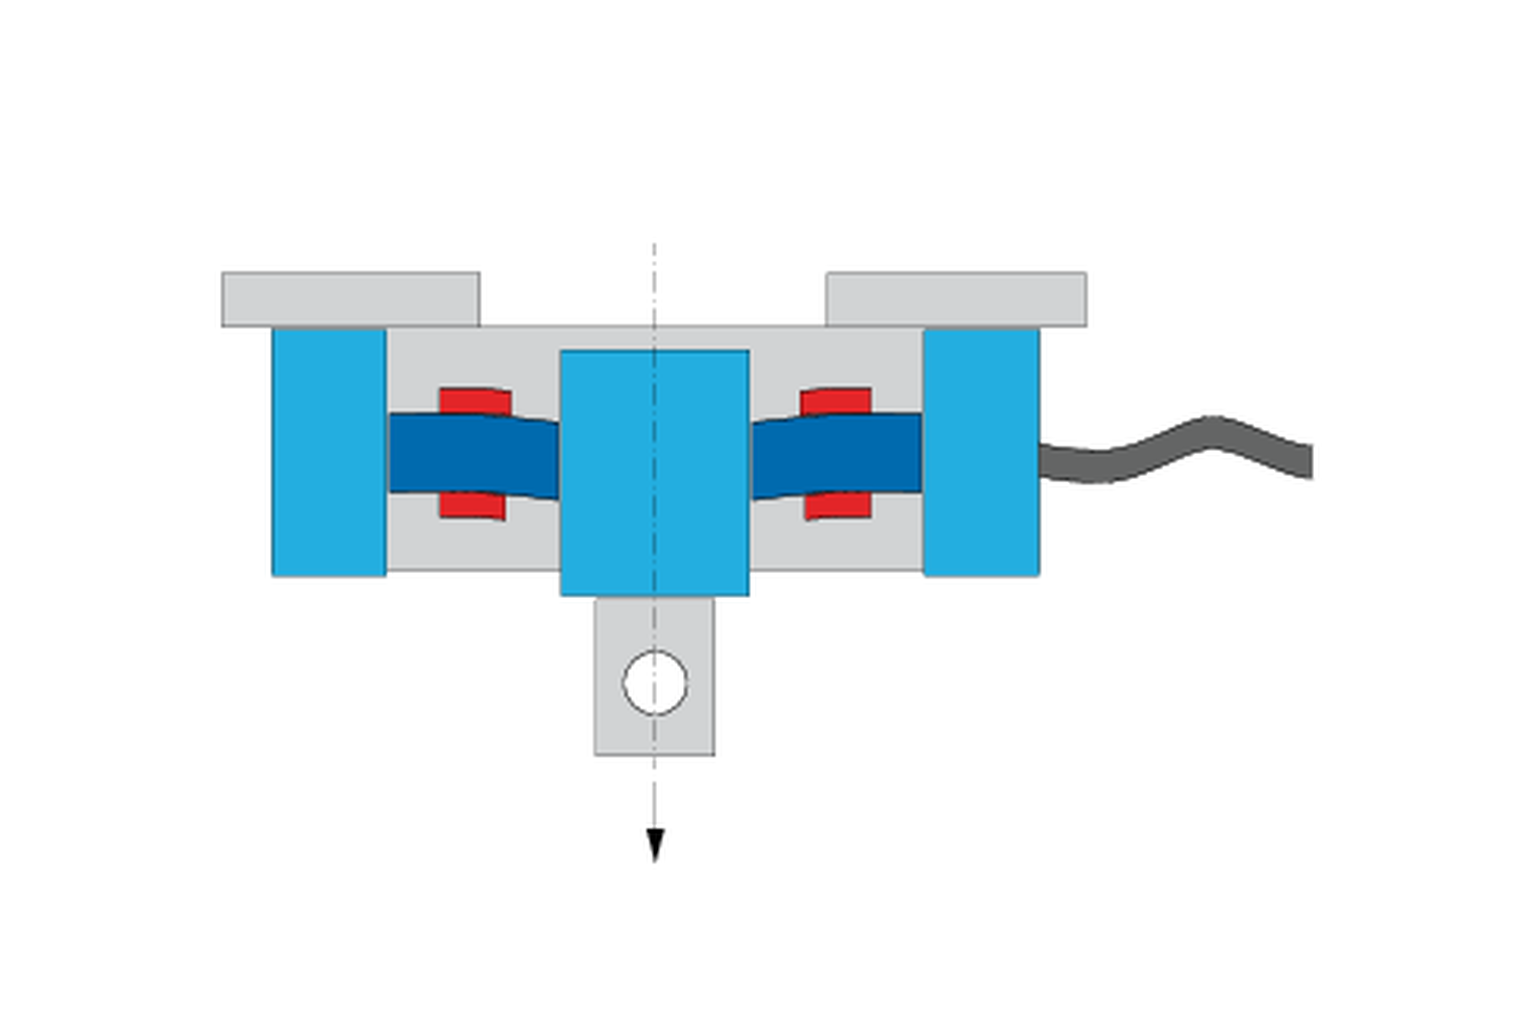 How does a load cell work? Illustration of load cell with strain gauge in elongated and compressed state